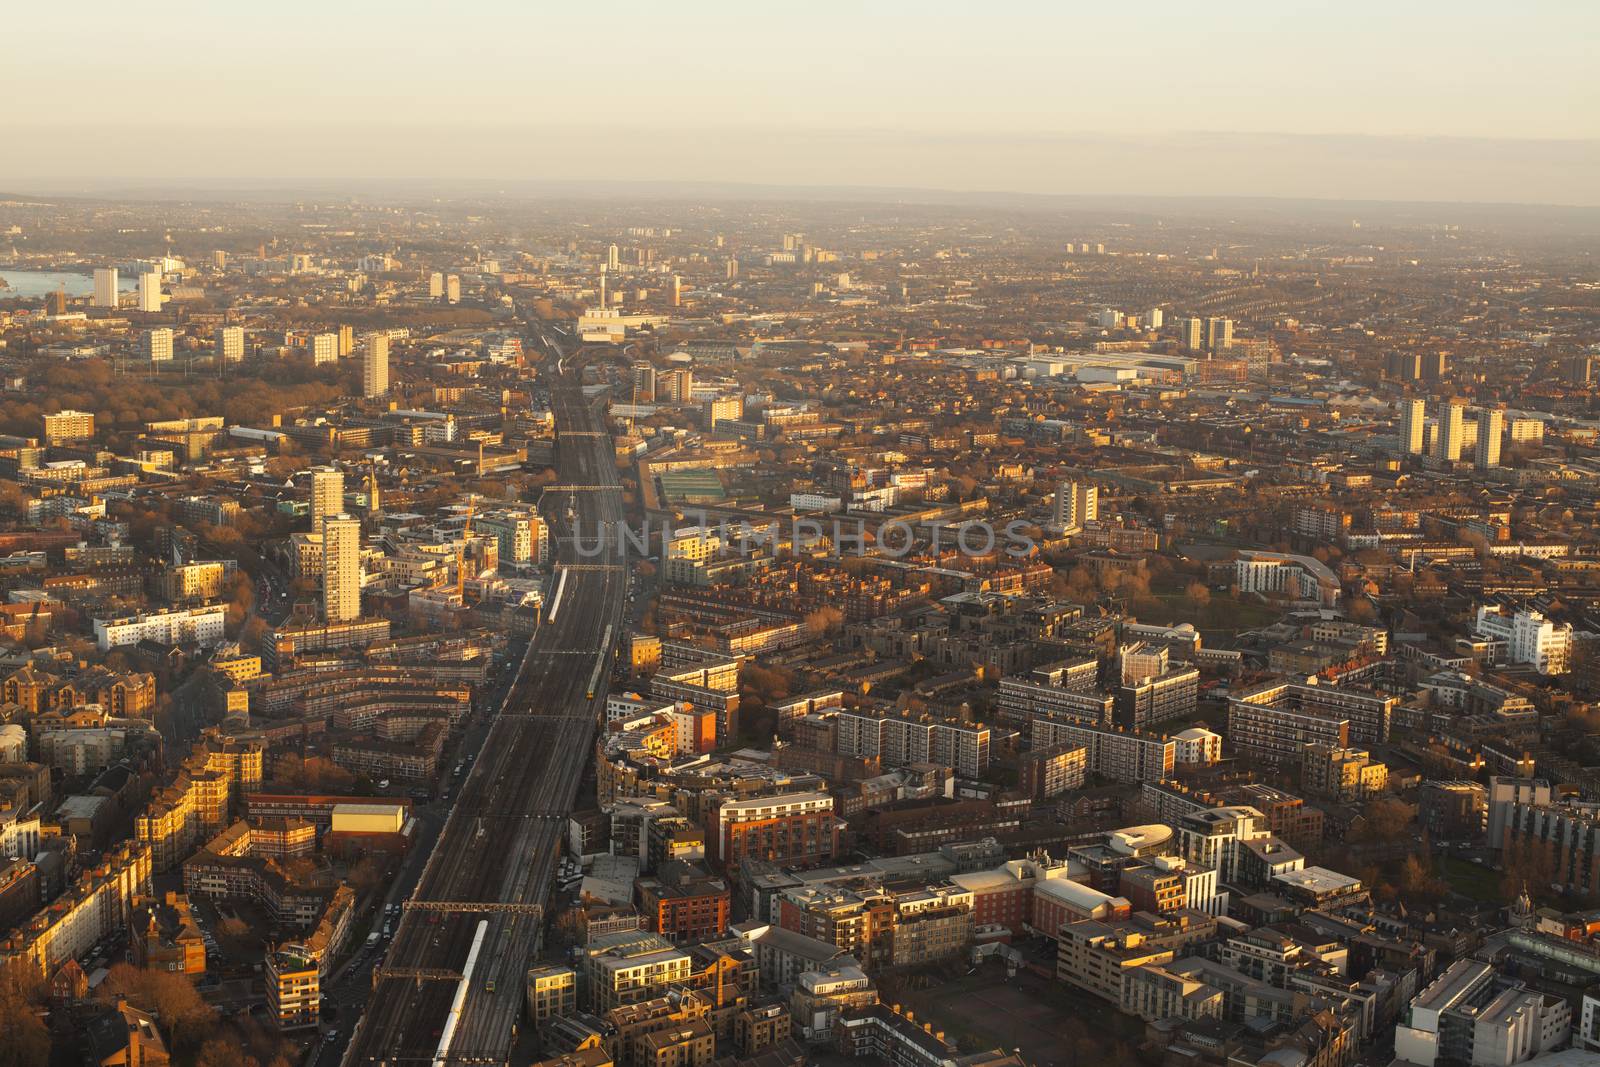 Elevated view of a London at sunset
London.
England.